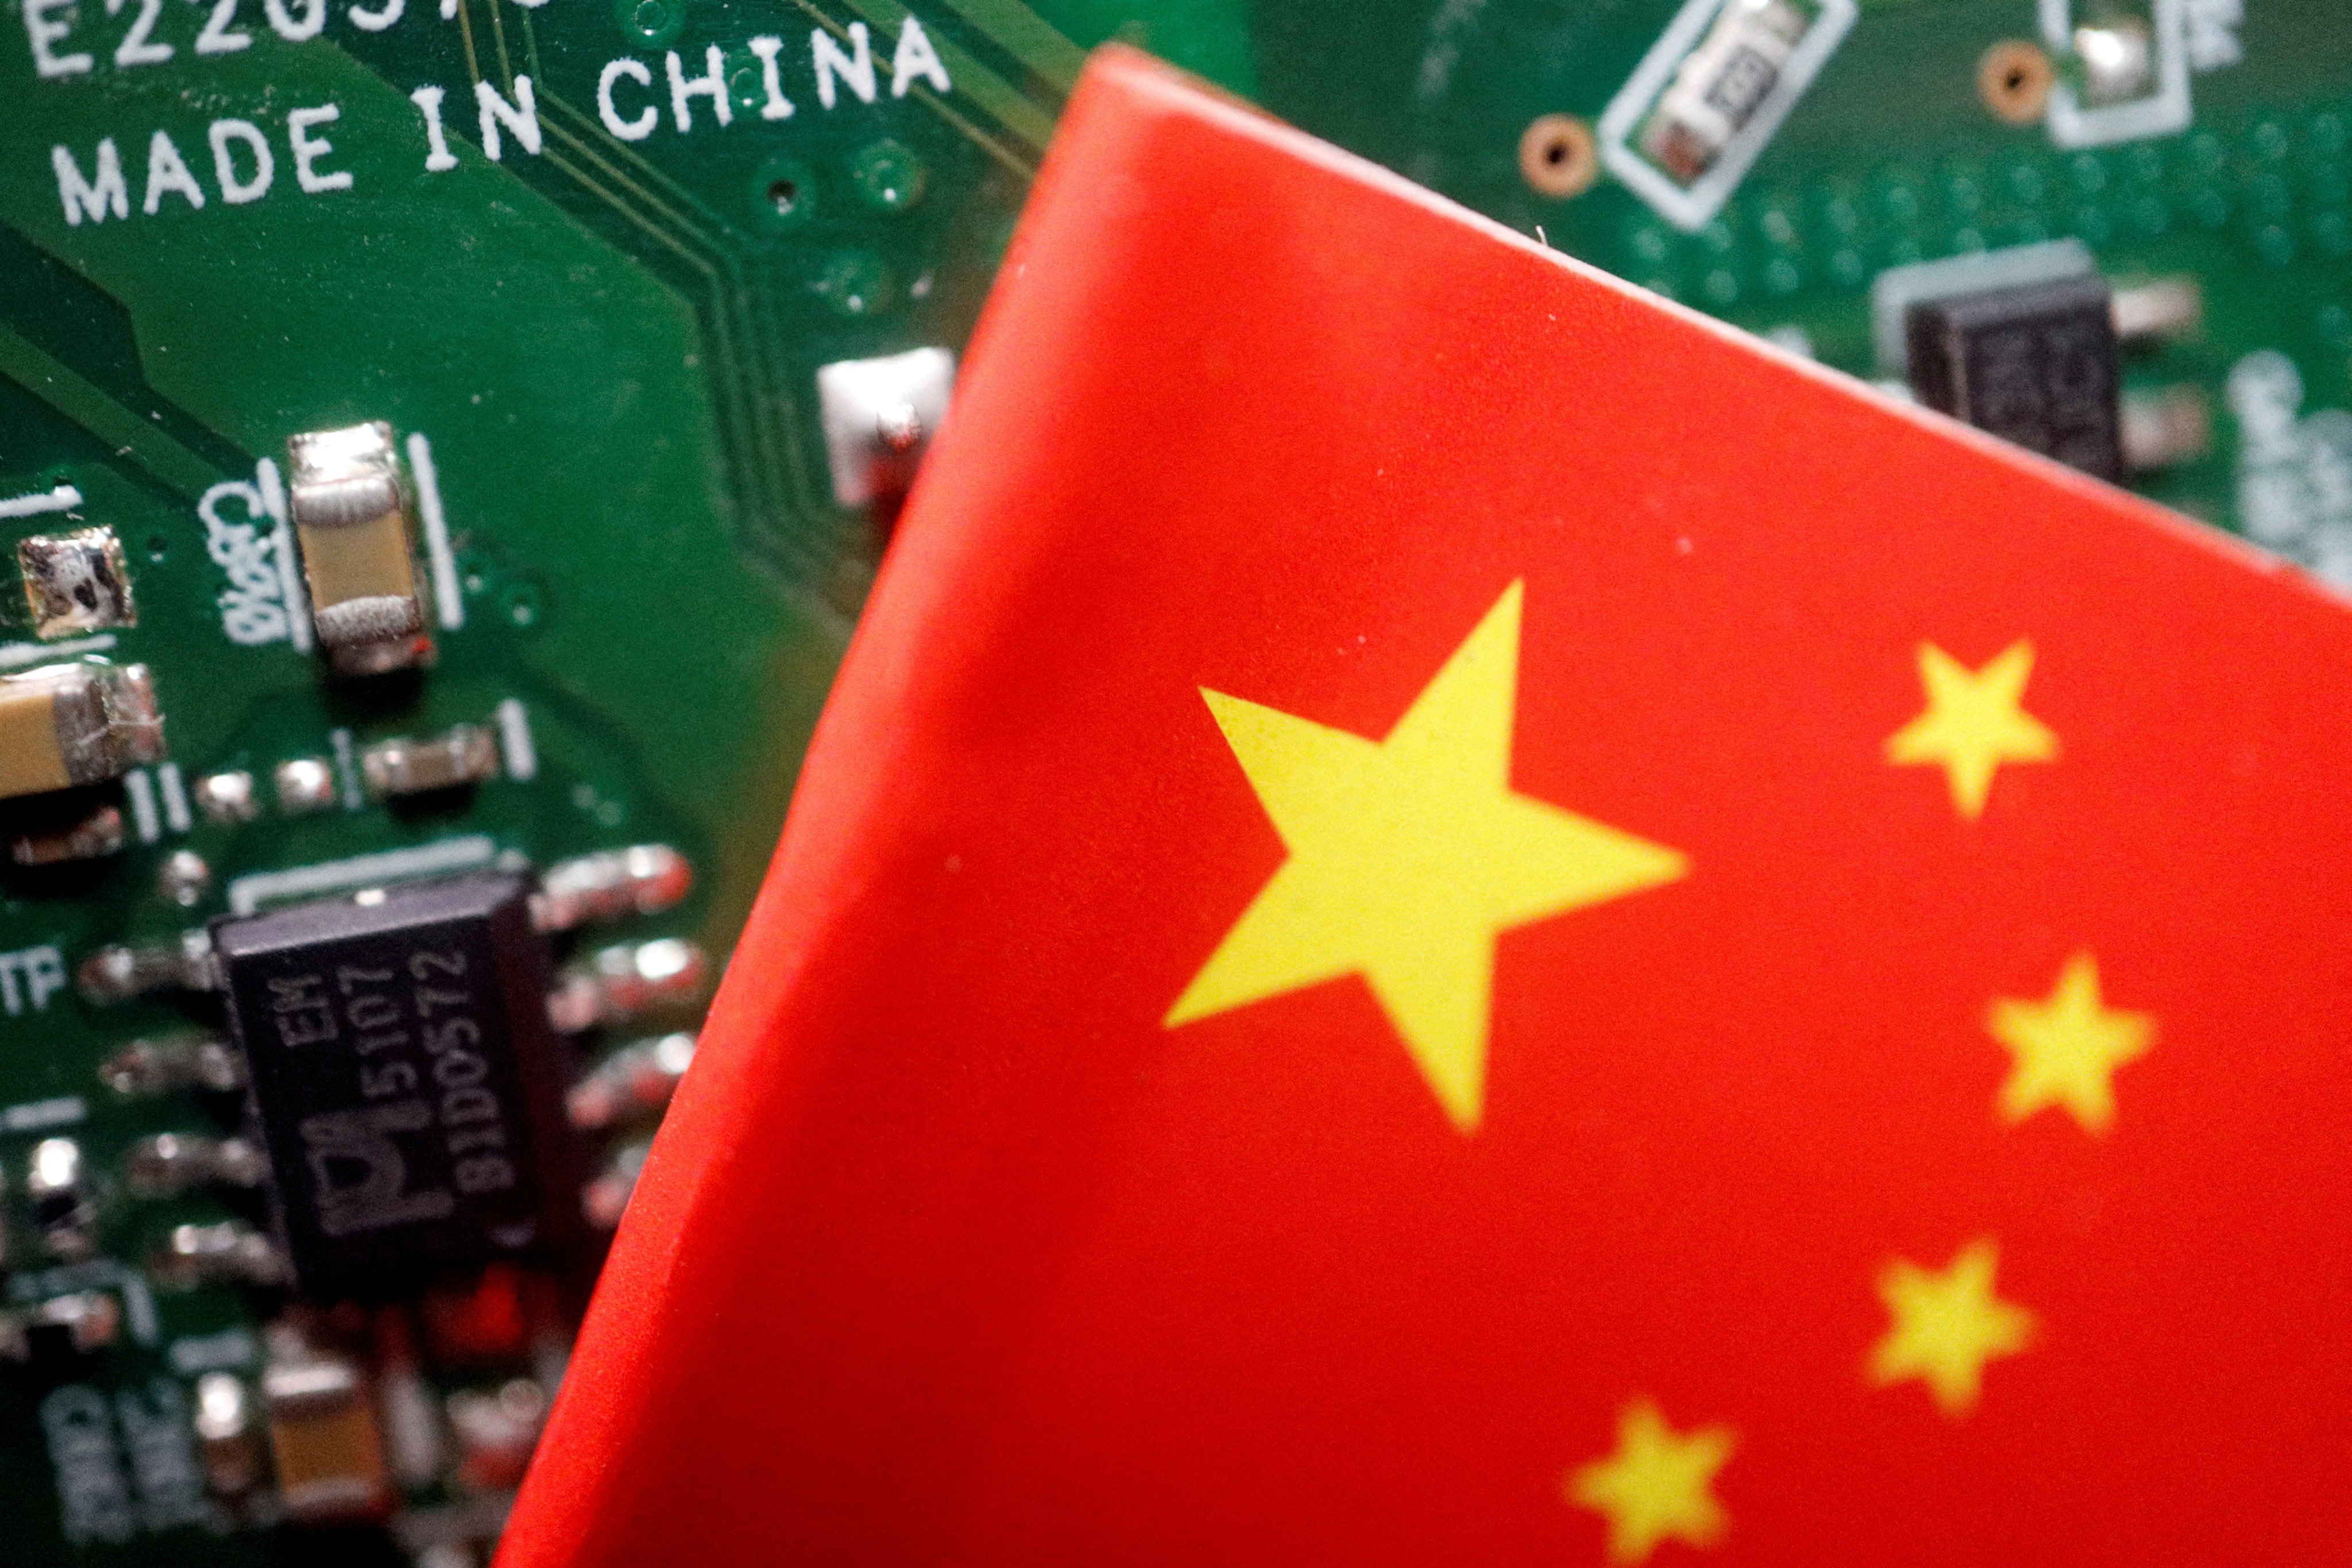 China has launched a framework for AI that calls for a ‘people-centred approach’, while urging countries to work together to prevent the misuse of technologies by terrorists and criminal groups. Photo: Reuters